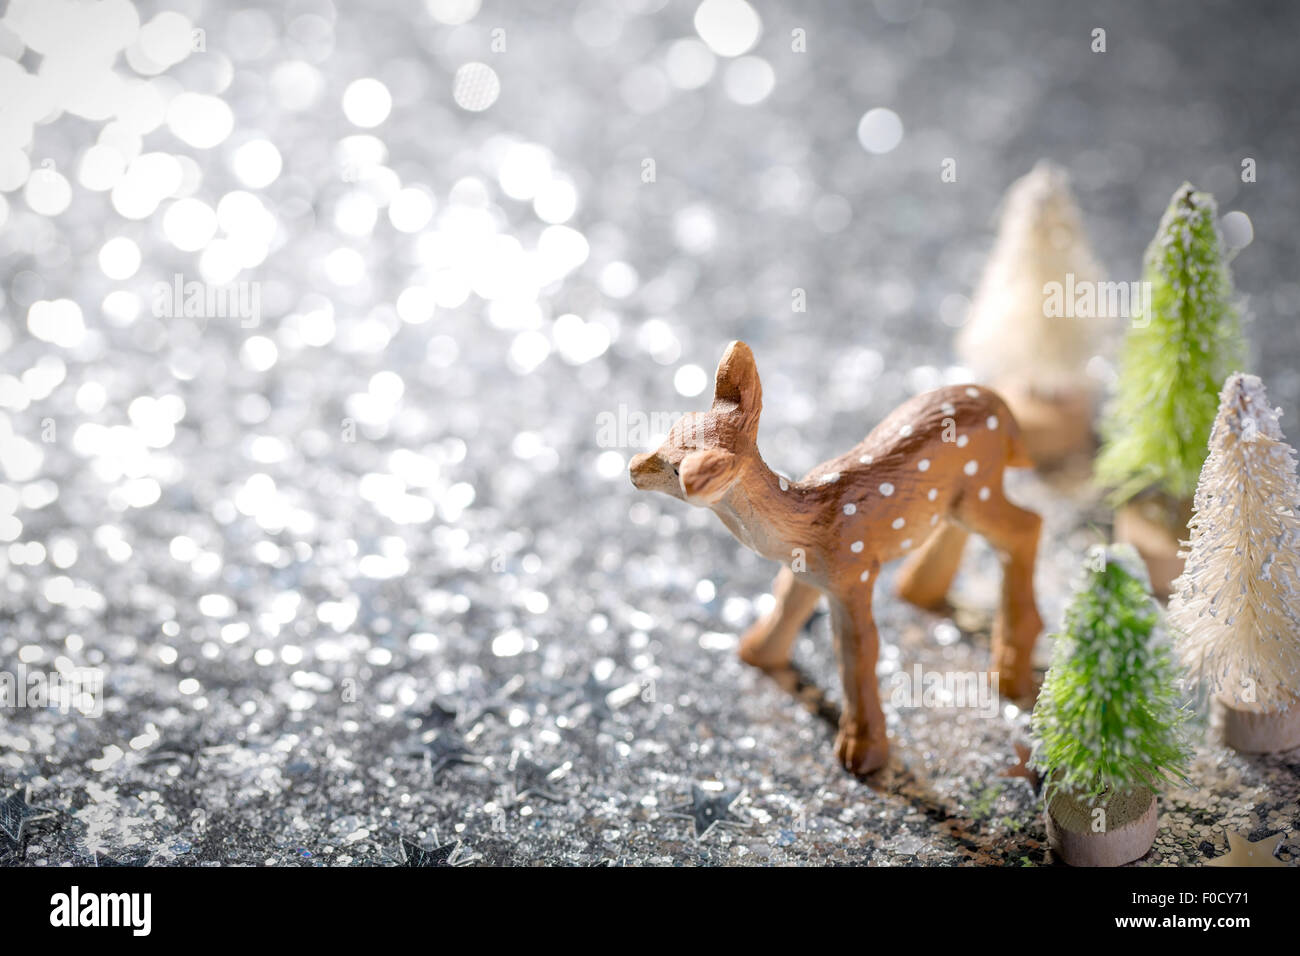 Christmas decoration with deer and fir tree Stock Photo